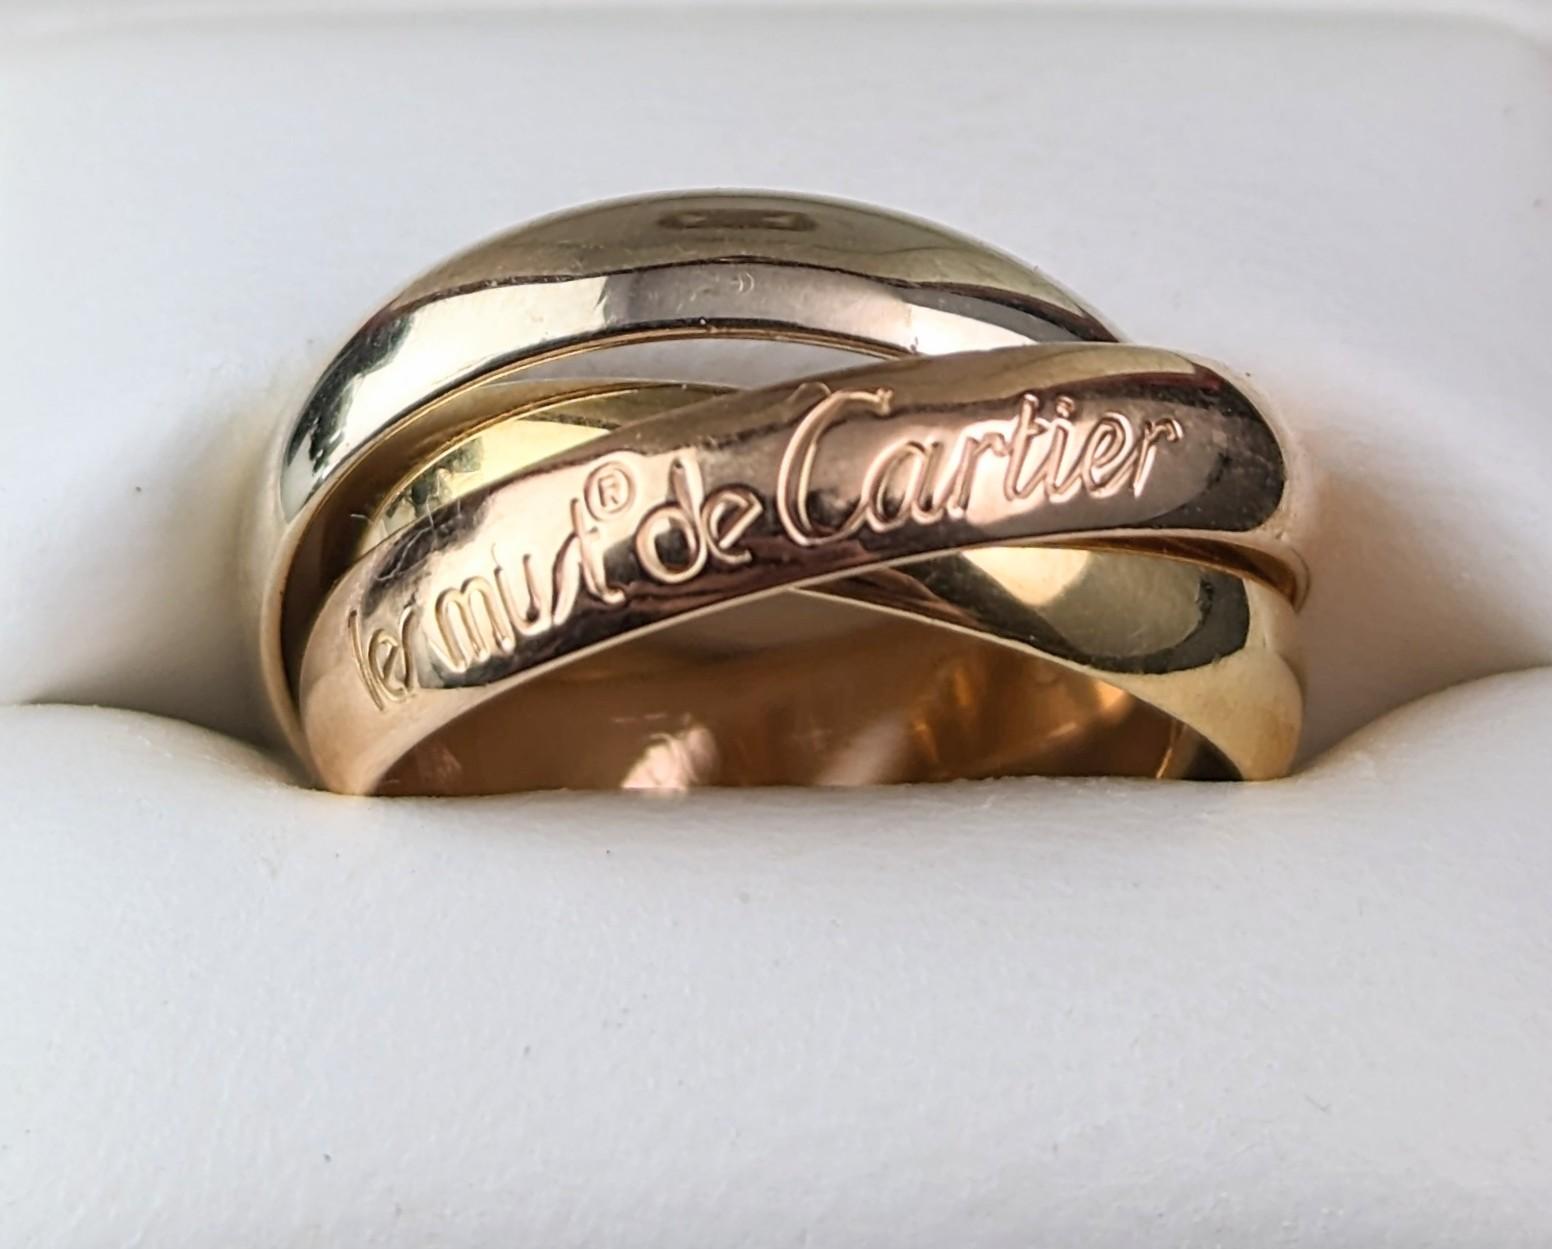 Vintage Les Must de Cartier Trinity Ring, 18k Gold, Boxed  im Angebot 5